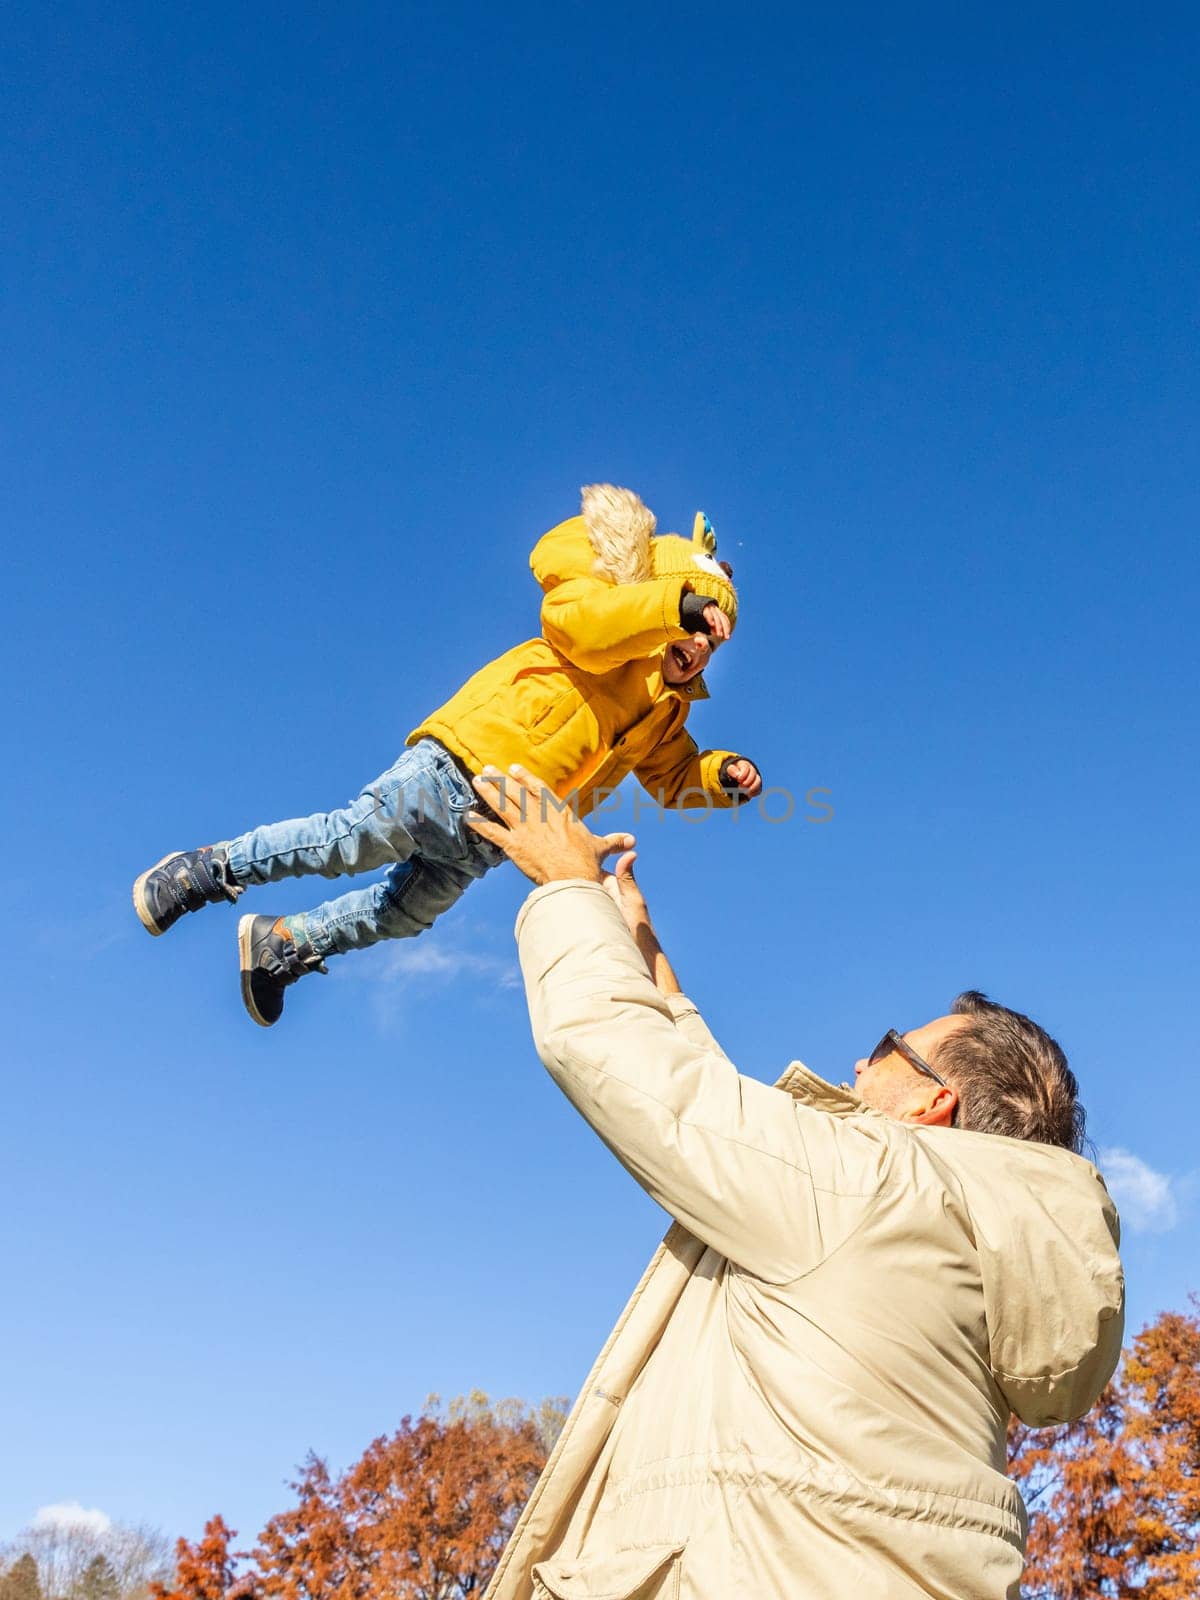 More, more,... dad, that's fun. Happy young father throws his cute little baby boy up in the air. Father's Day, Father and his son baby boy playing and hugging outdoors in nature in fall